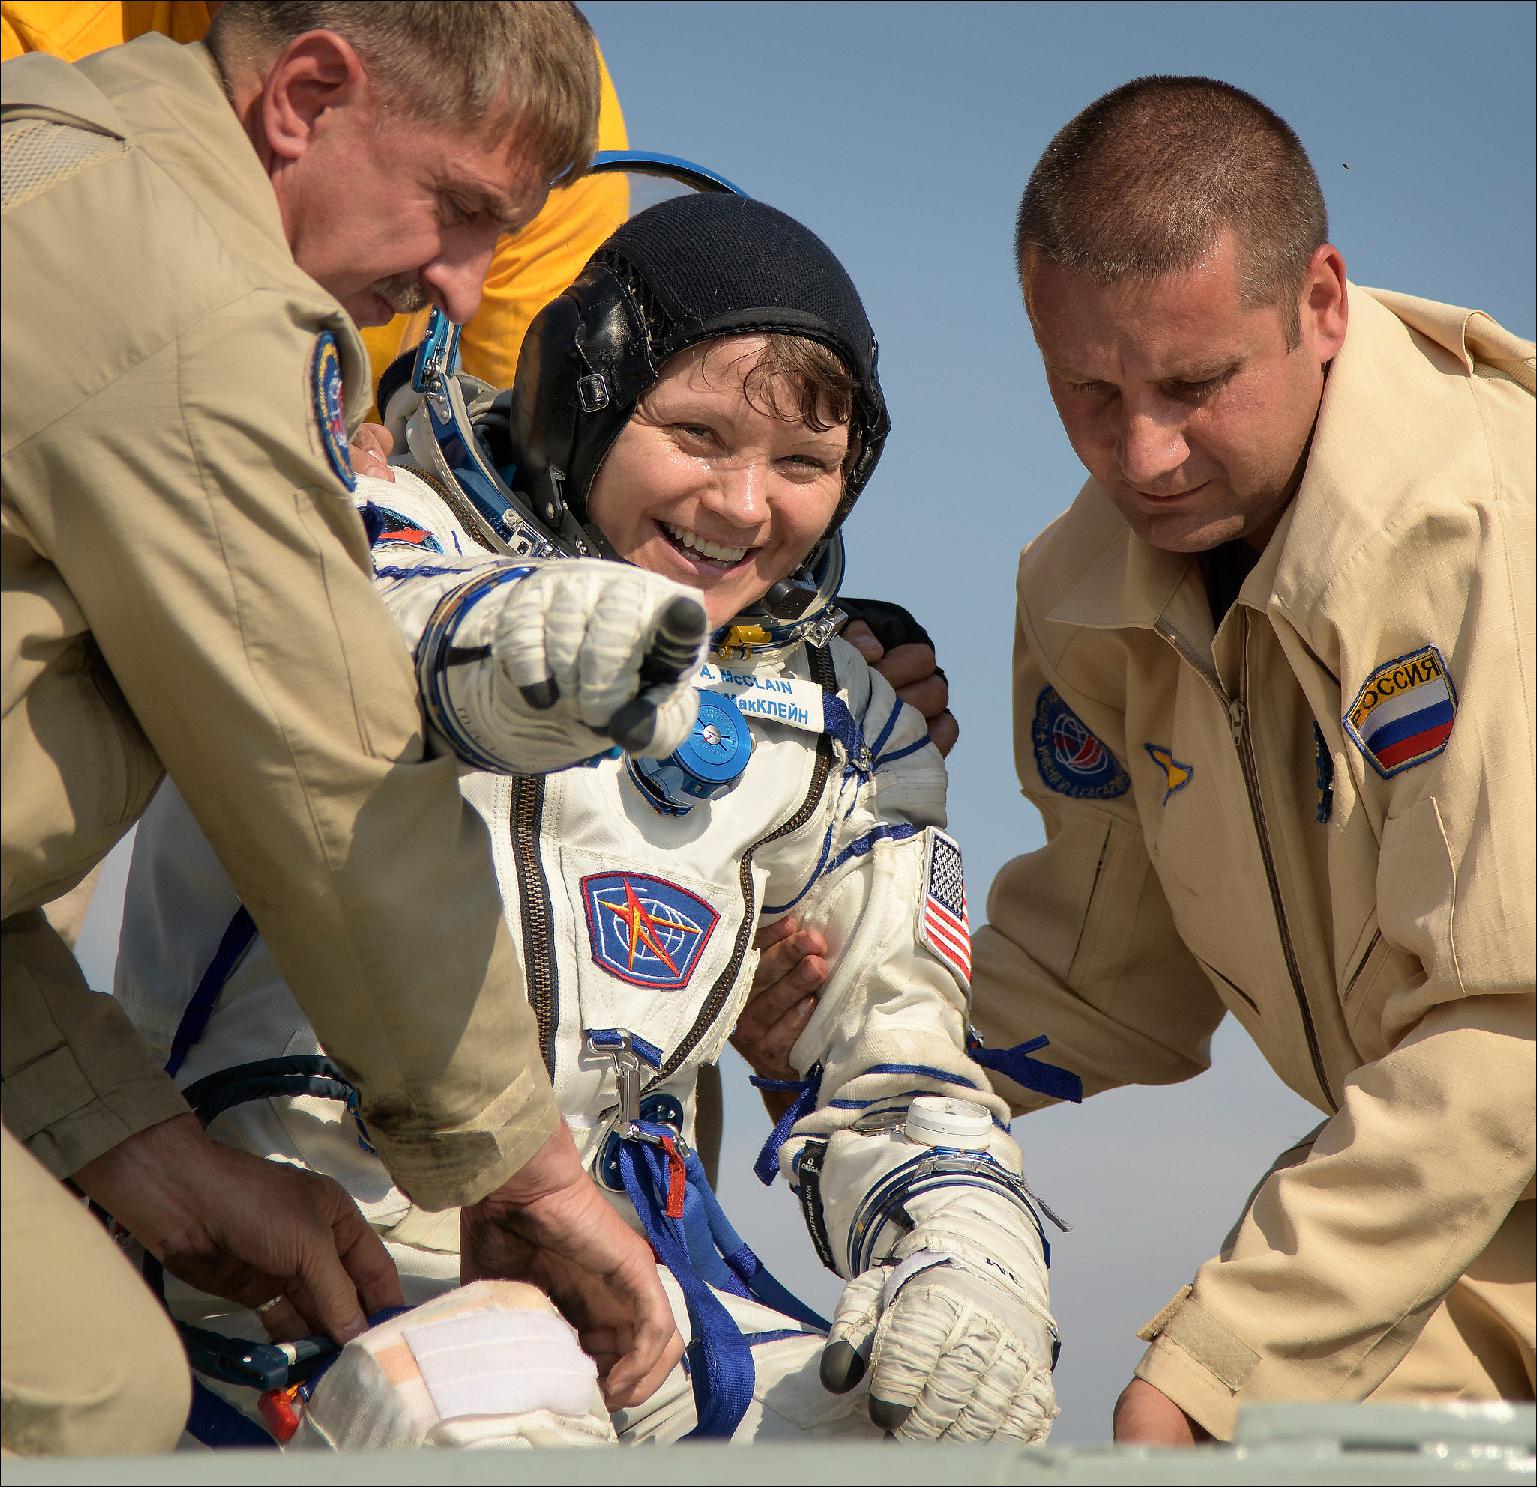 Figure 79: NASA astronaut Anne McClain is assisted out of the Soyuz MS-11 that returned her and crewmates Oleg Kononenko of the Russian space agency Roscosmos and David Saint-Jacques of the Canadian Space Agency back to Earth on June 24, 2019, landing in a remote area near Zhezkazgan, Kazakhstan, after 204 days aboard the International Space Station (image credit: NASA)